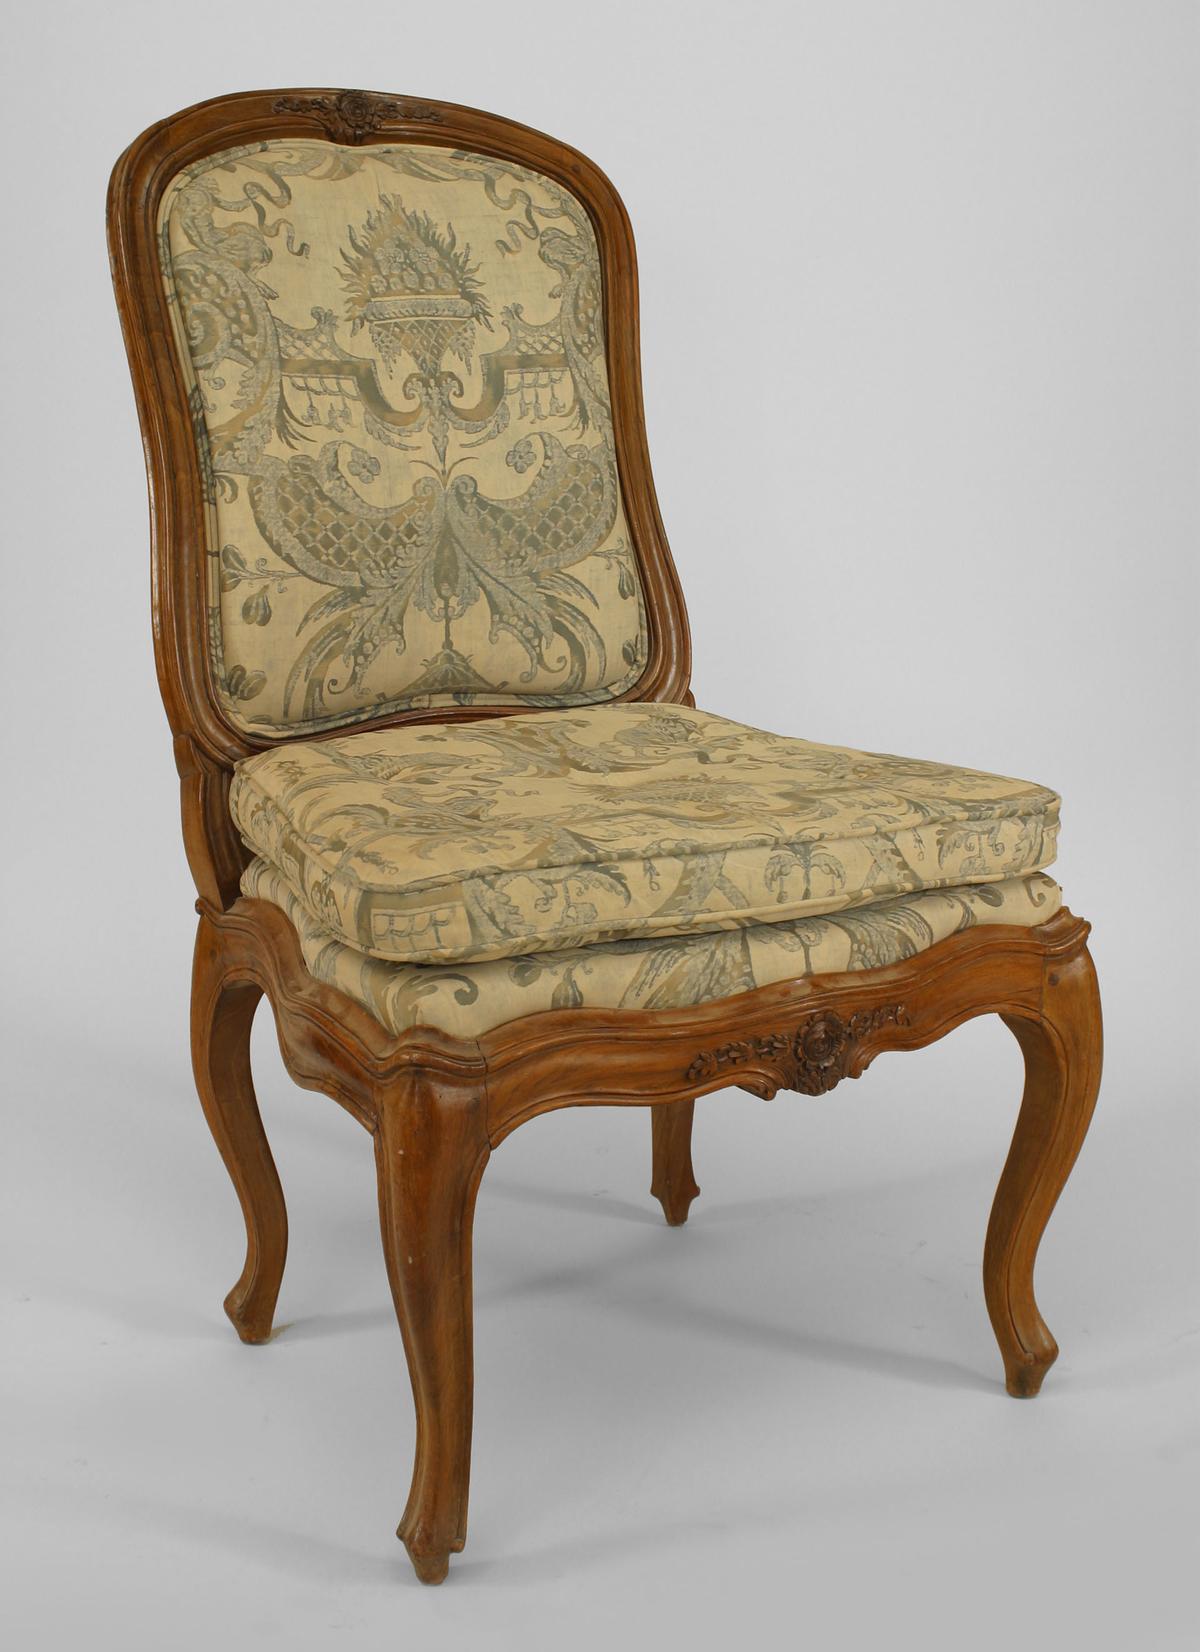 Set of 10 French Louis XV (18th Cent style) walnut side chairs with roset & floral centered carving on back & seat front rail and Fortuny upholstered seat & back.
